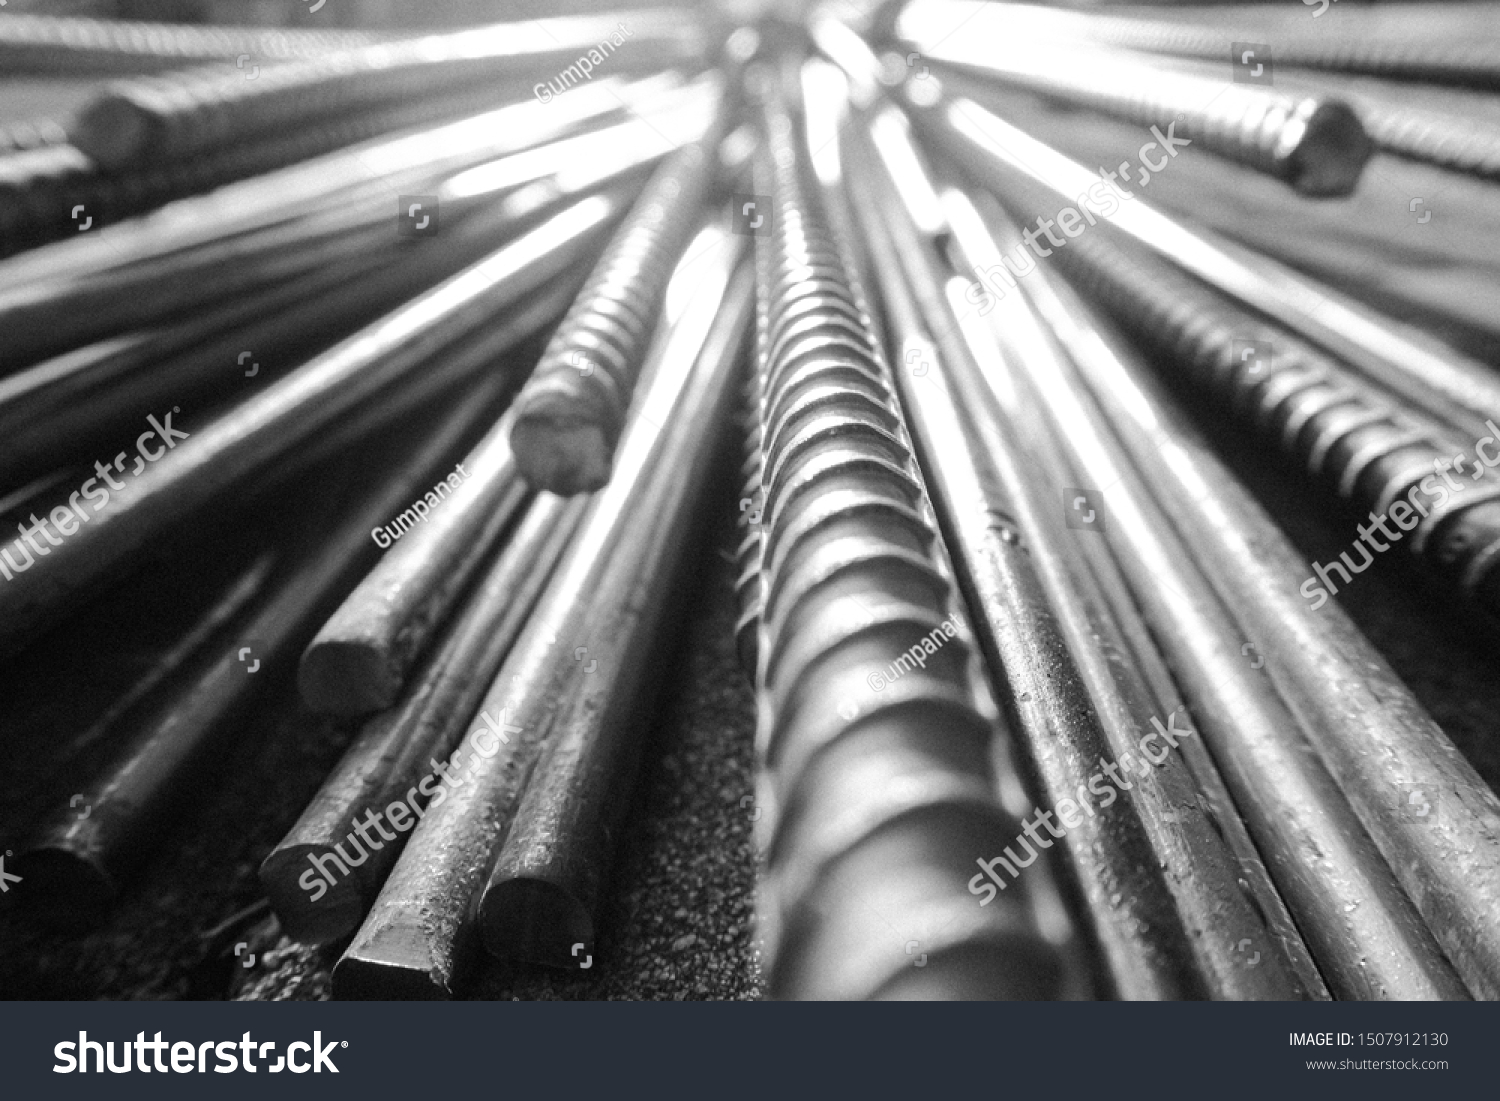 close up steel bar or steel reinforcement bar in the construction site with sunbeam at the morning, steel rods bars can use for reinforce concrete.  #1507912130